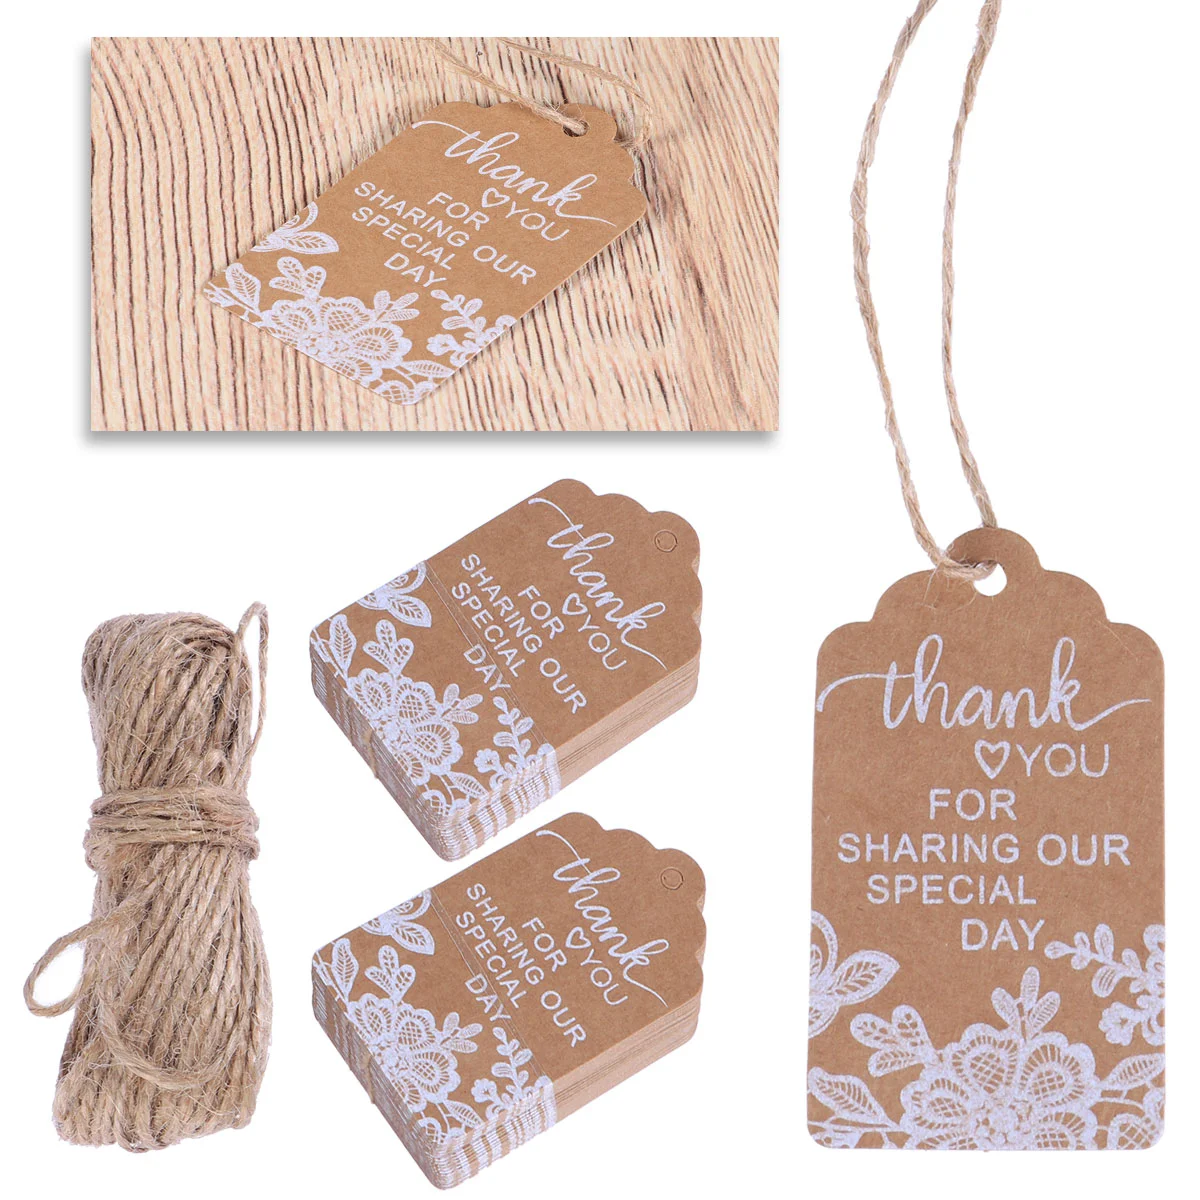 

Tags Wedding Kraft Paper Gift Vintage Thank You Party Hanging Tag Favors Brown Favor Luggage String Multiuse Printed Rectangular